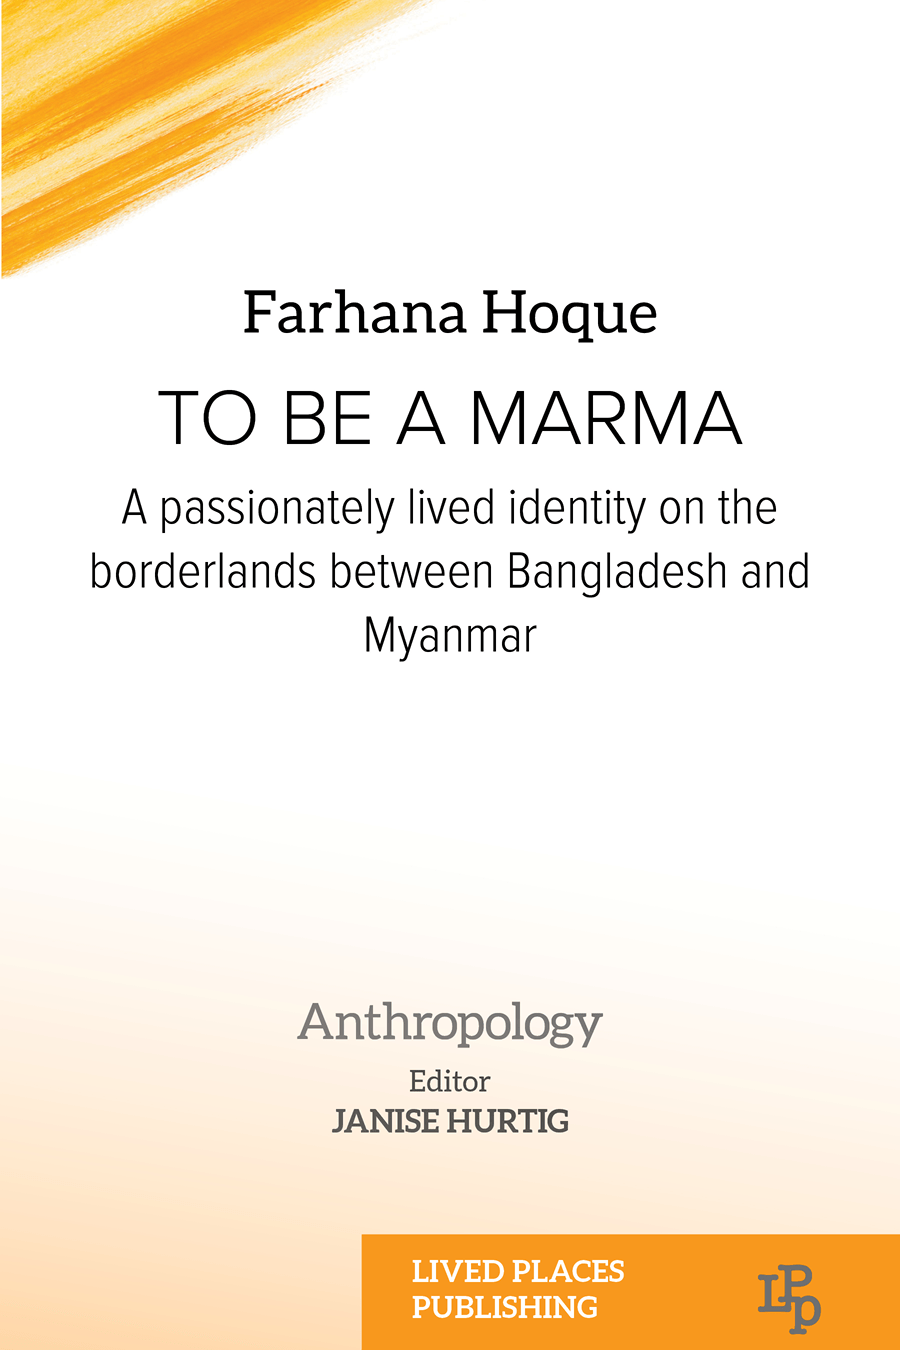 To be a Marma: A passionately lived identity on the borderlands between Bangladesh and Myanmar by Farhana Hoque